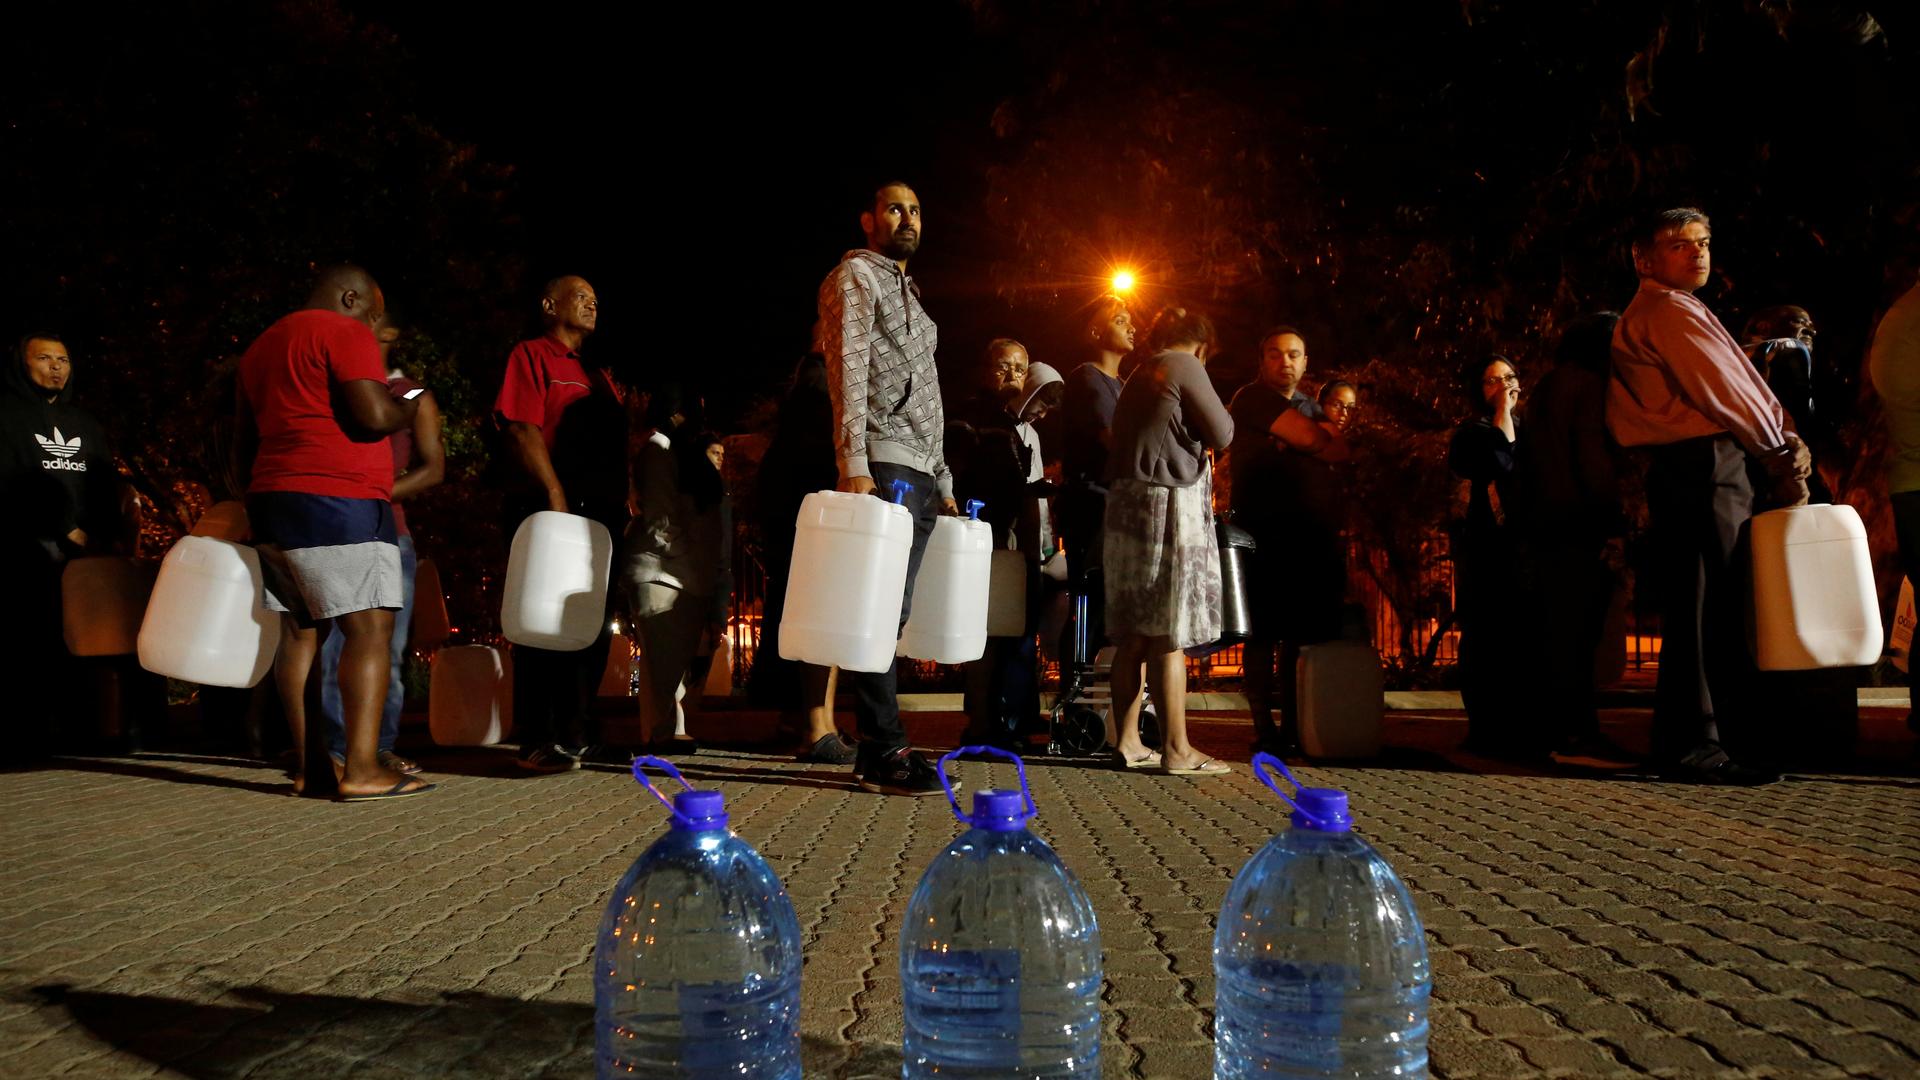 People queued to collect water as fears over the city's water crisis grew earlier this year in Cape Town, South Africa.